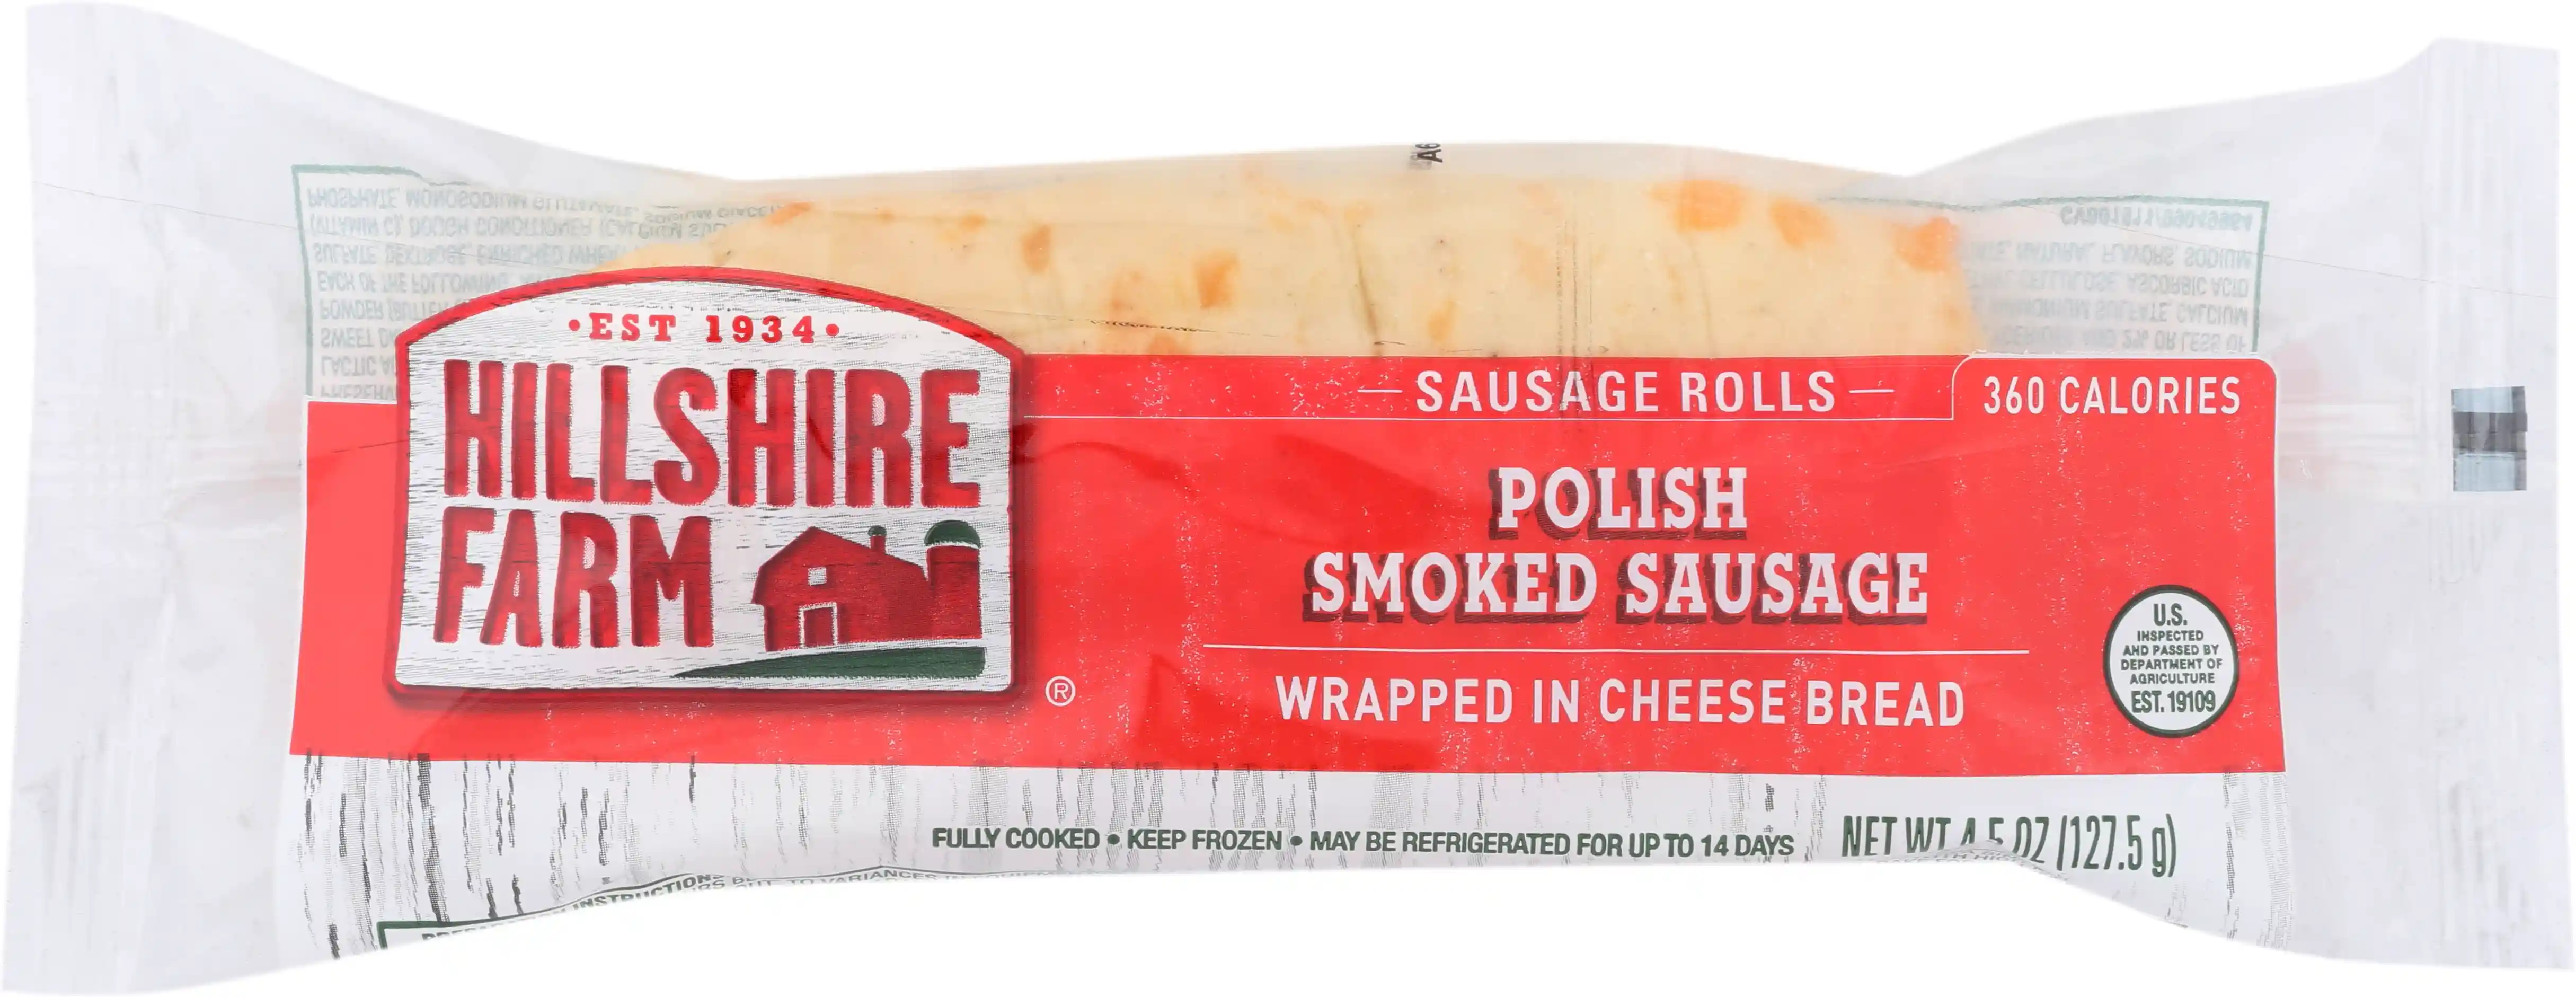 Polish Smoked Sausage Wrapped in Cheese Bread_image_21